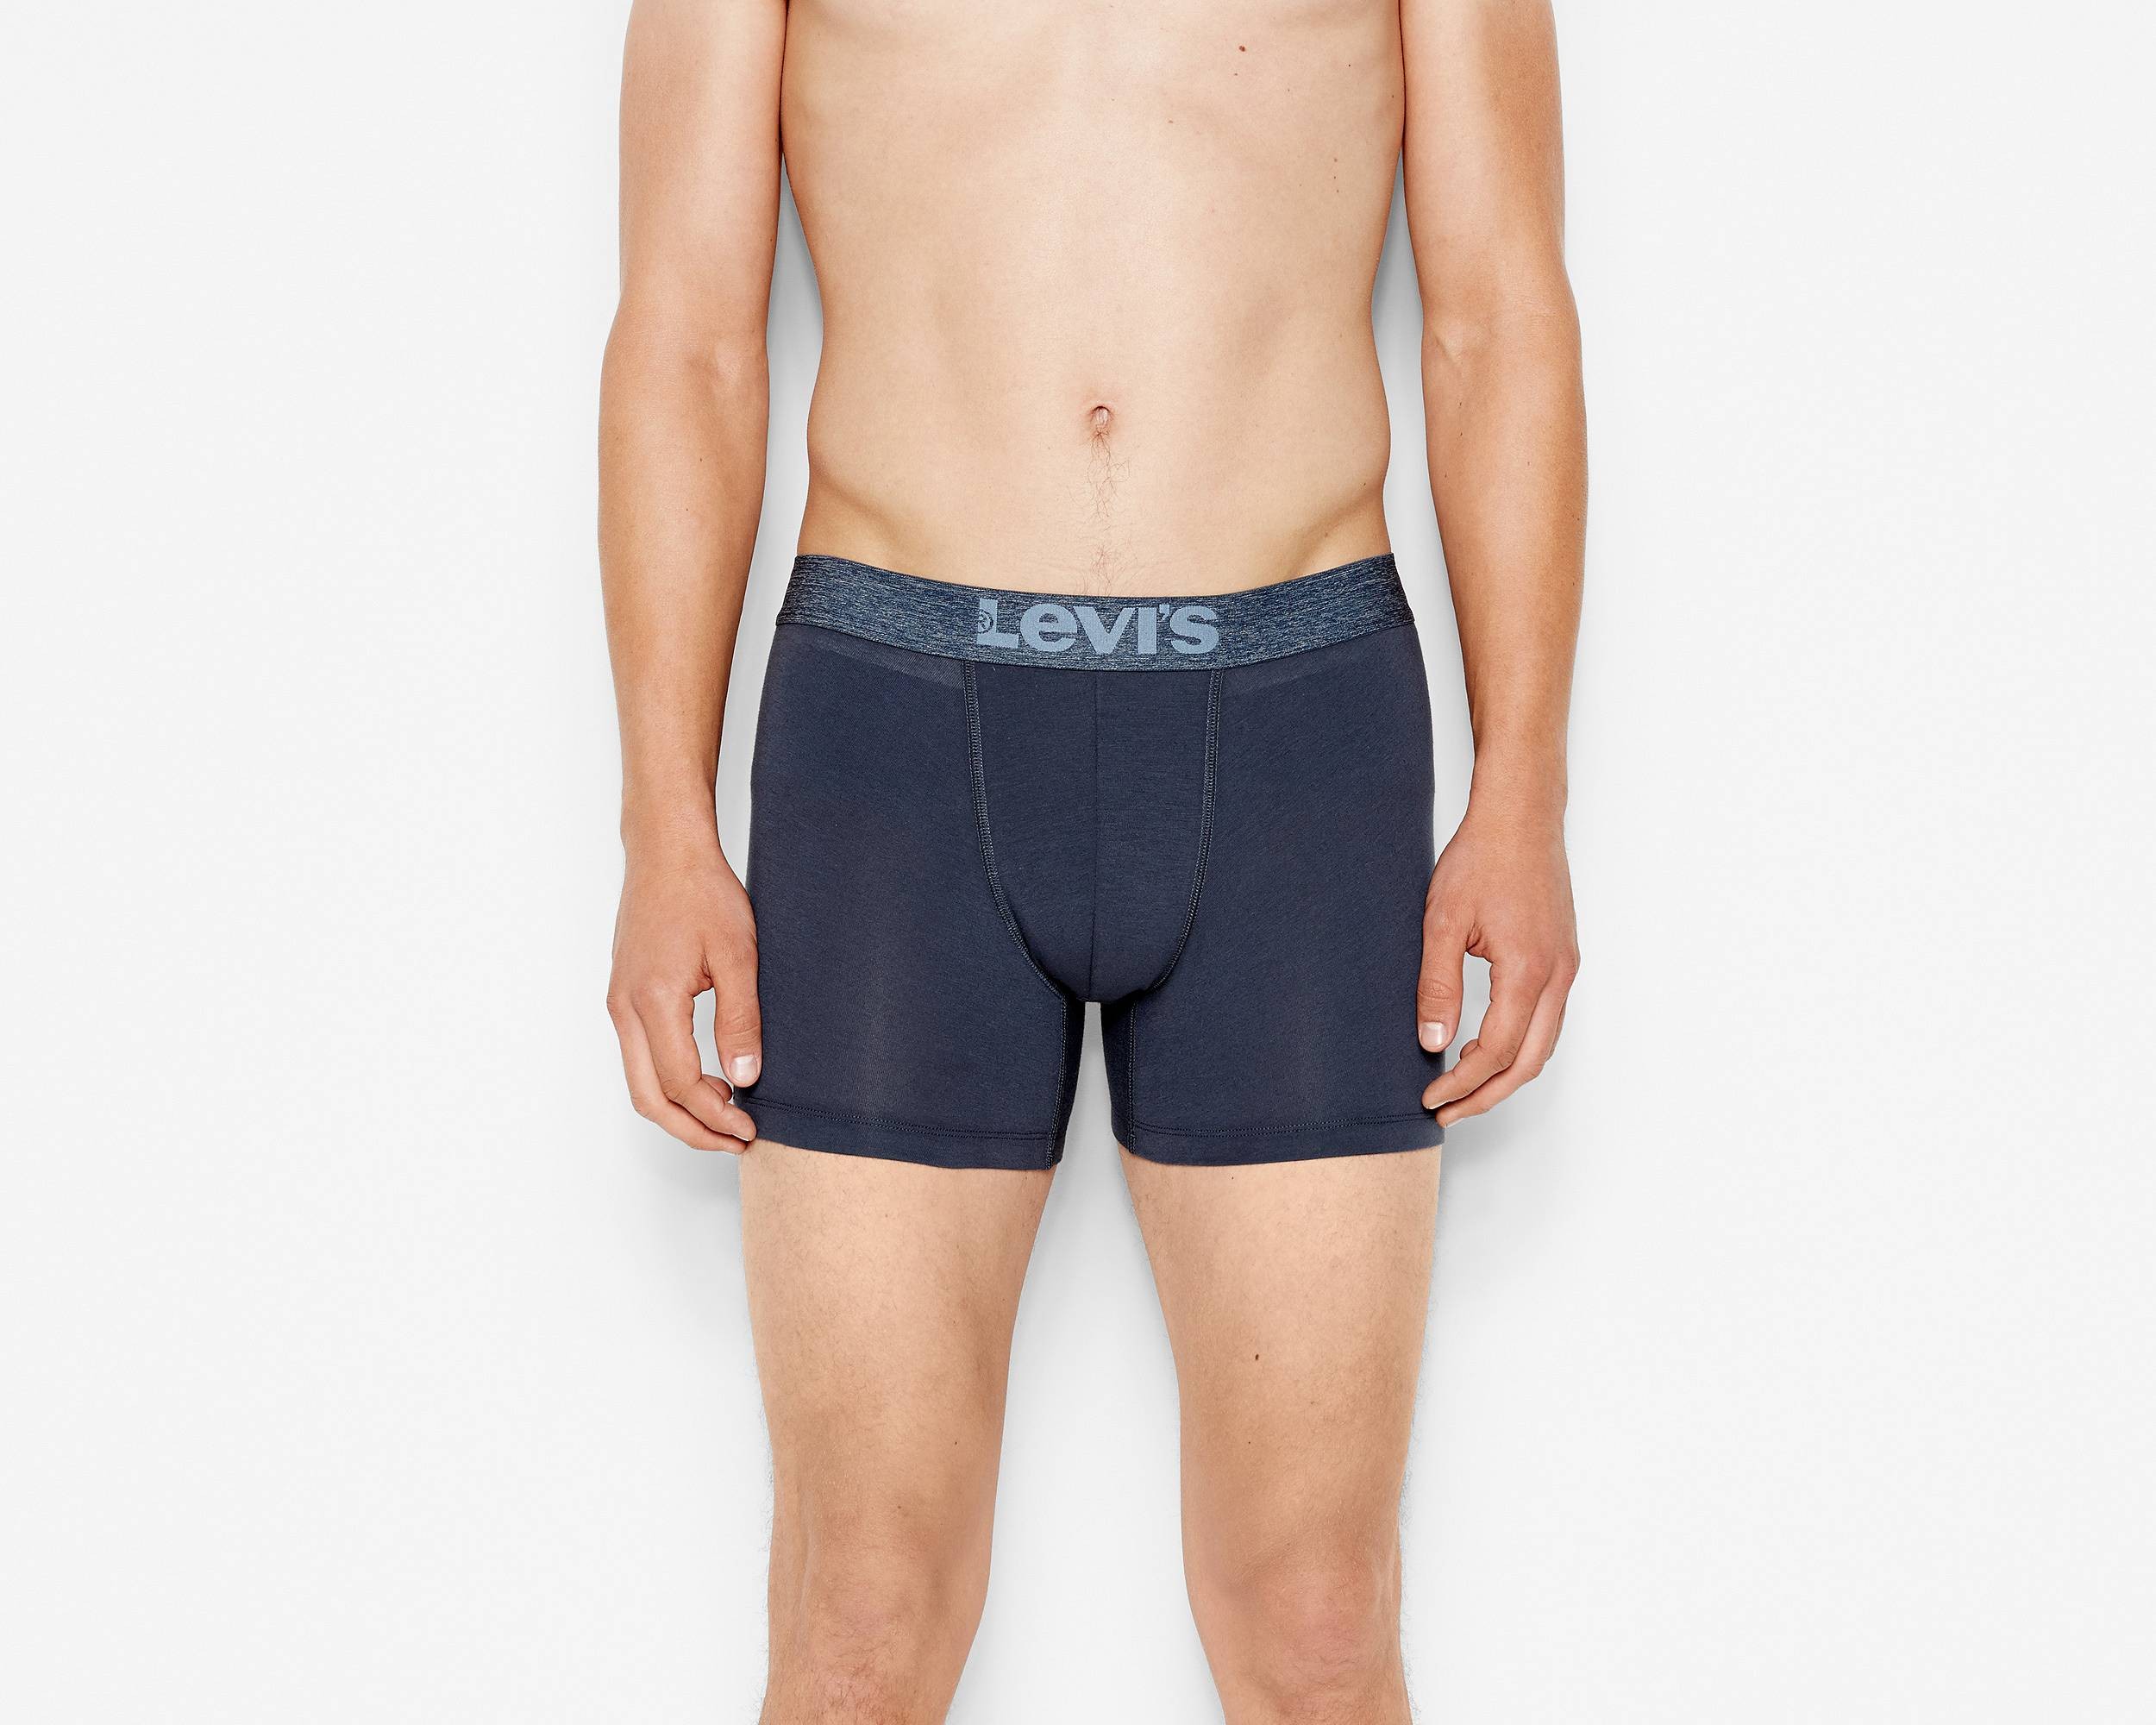 Levis 200sf boxer Brief 2pack azul